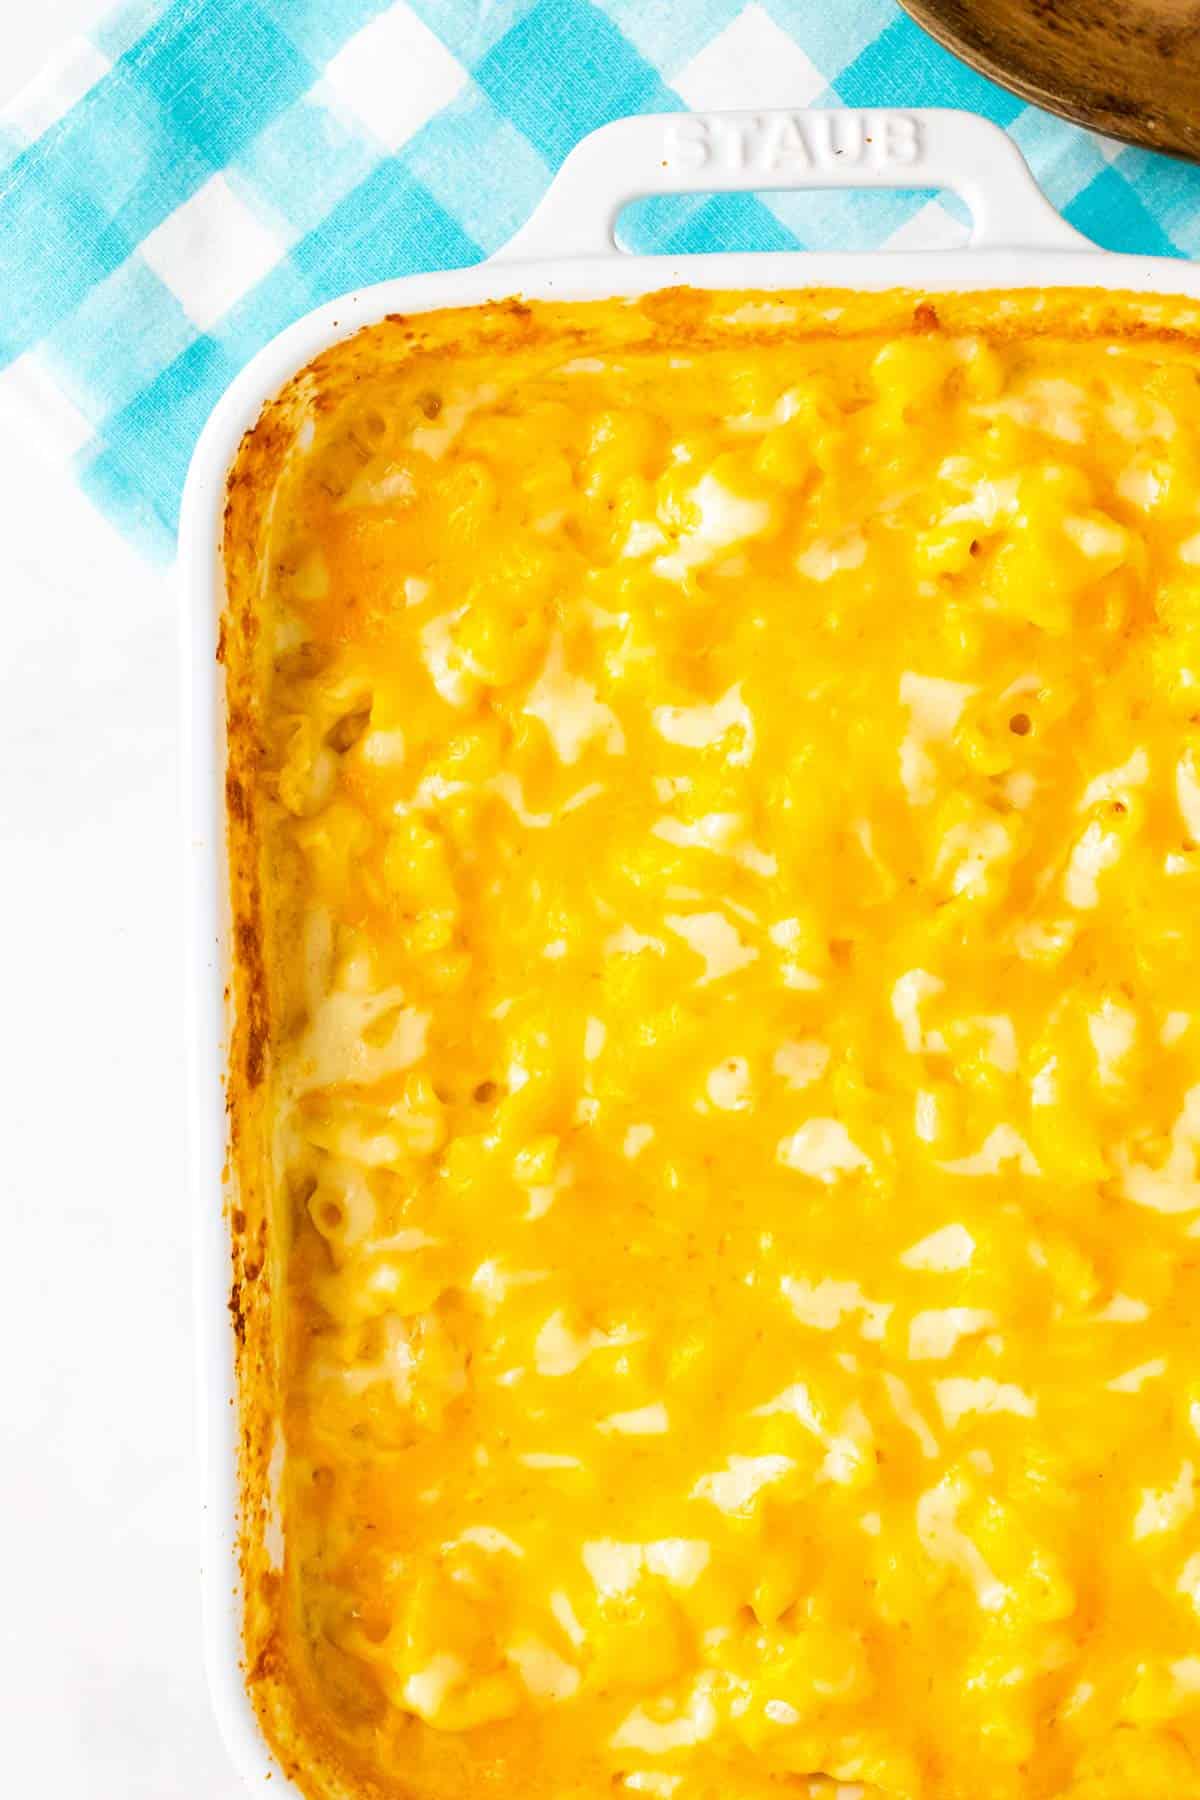 Top-down view of a baking dish filled with baked creamy macaroni and cheese.